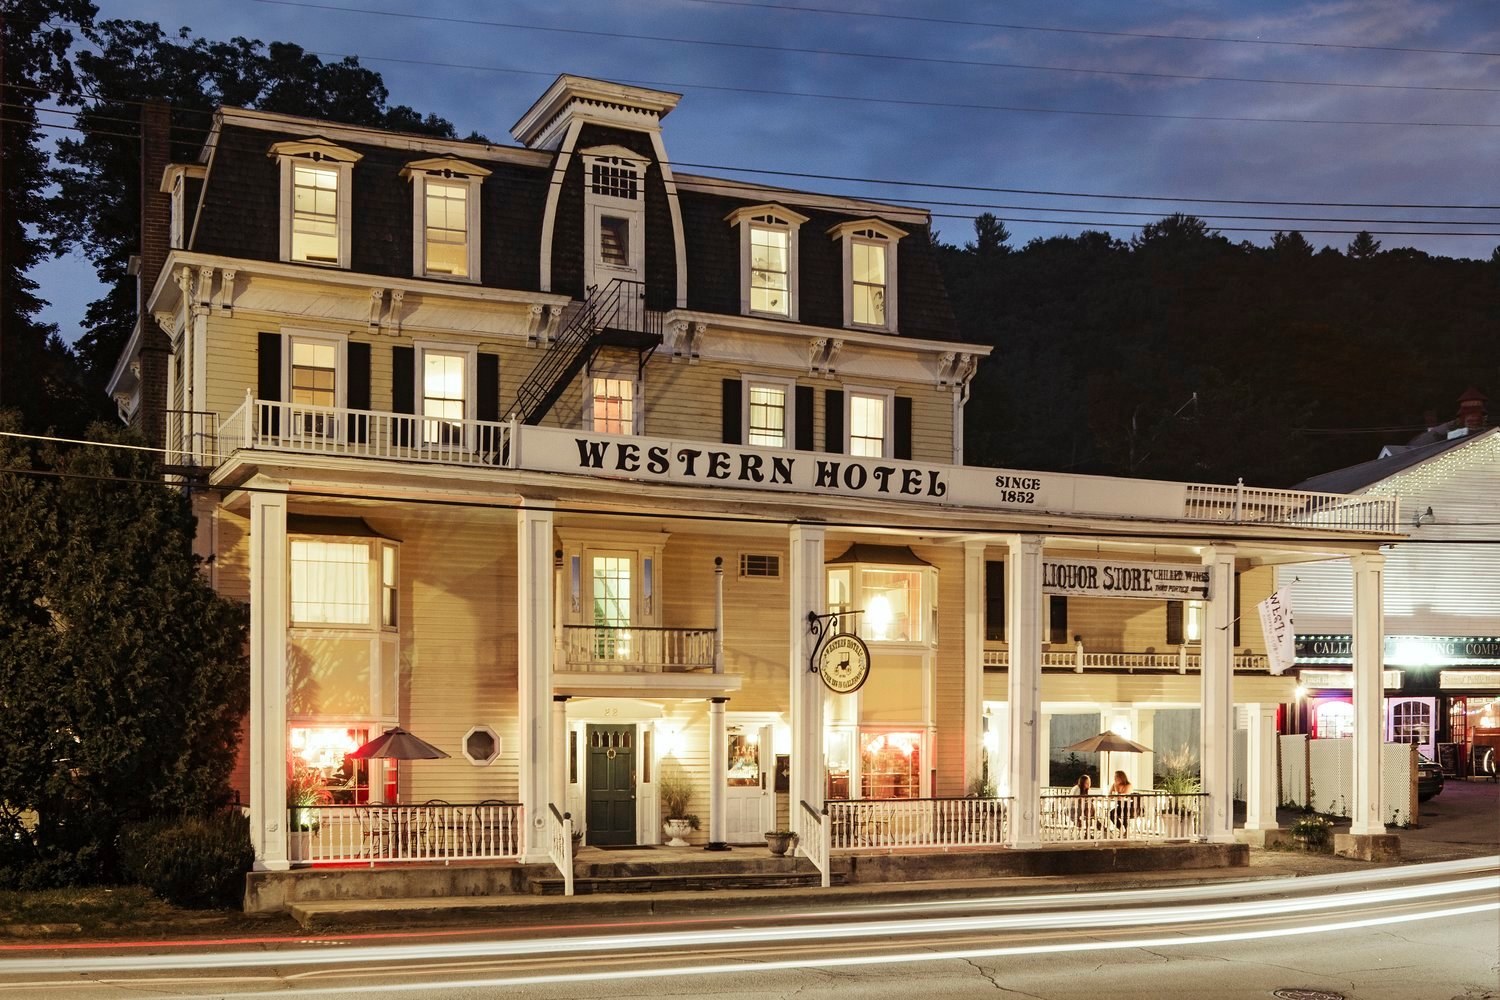 The Western Hotel in Callicoon welcomes all with food, drink and hospitality.